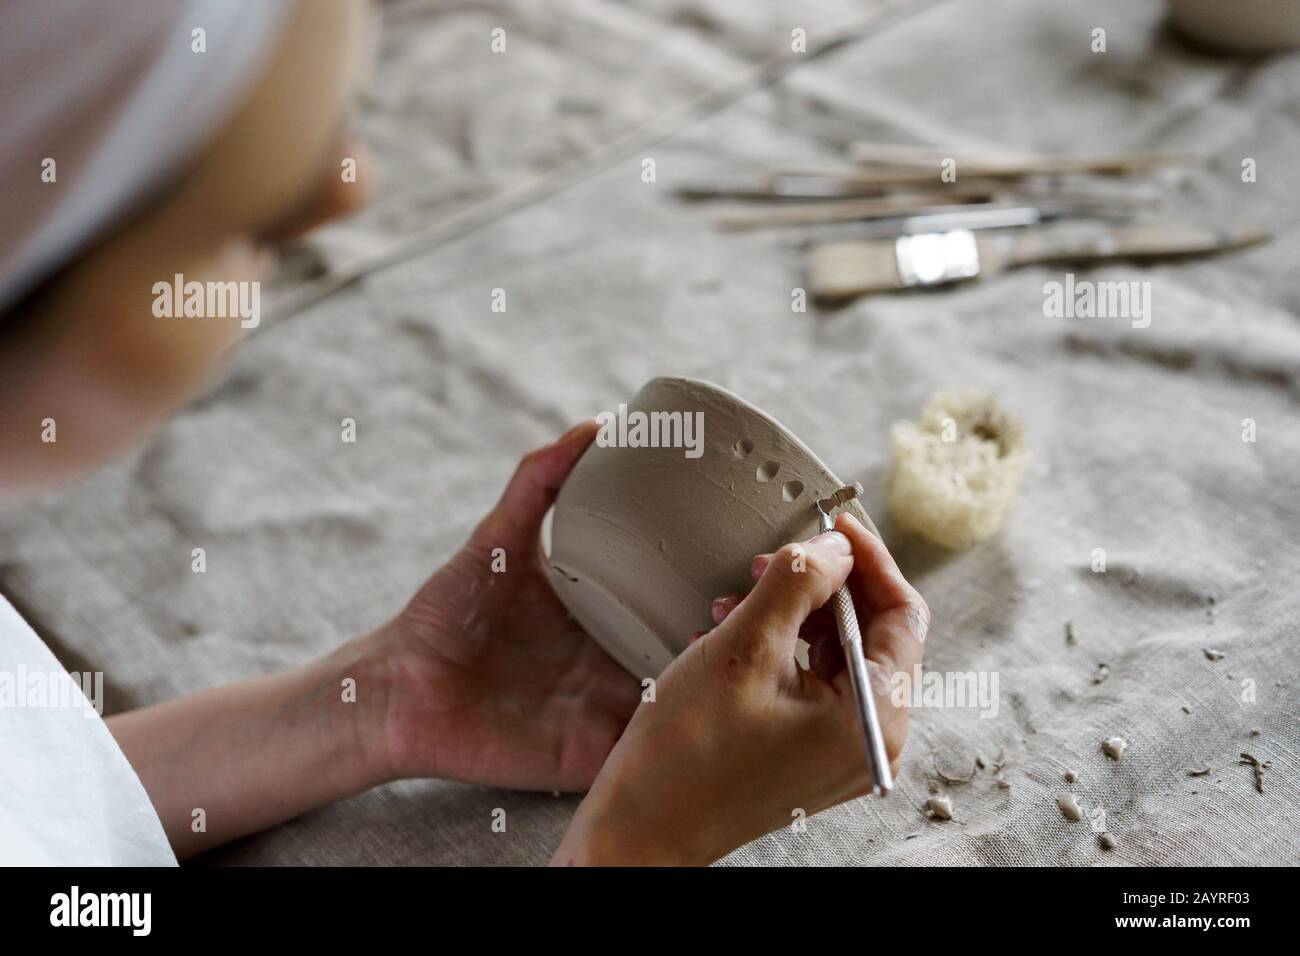 Female hands hold a bowl for casting clay products Stock Photo